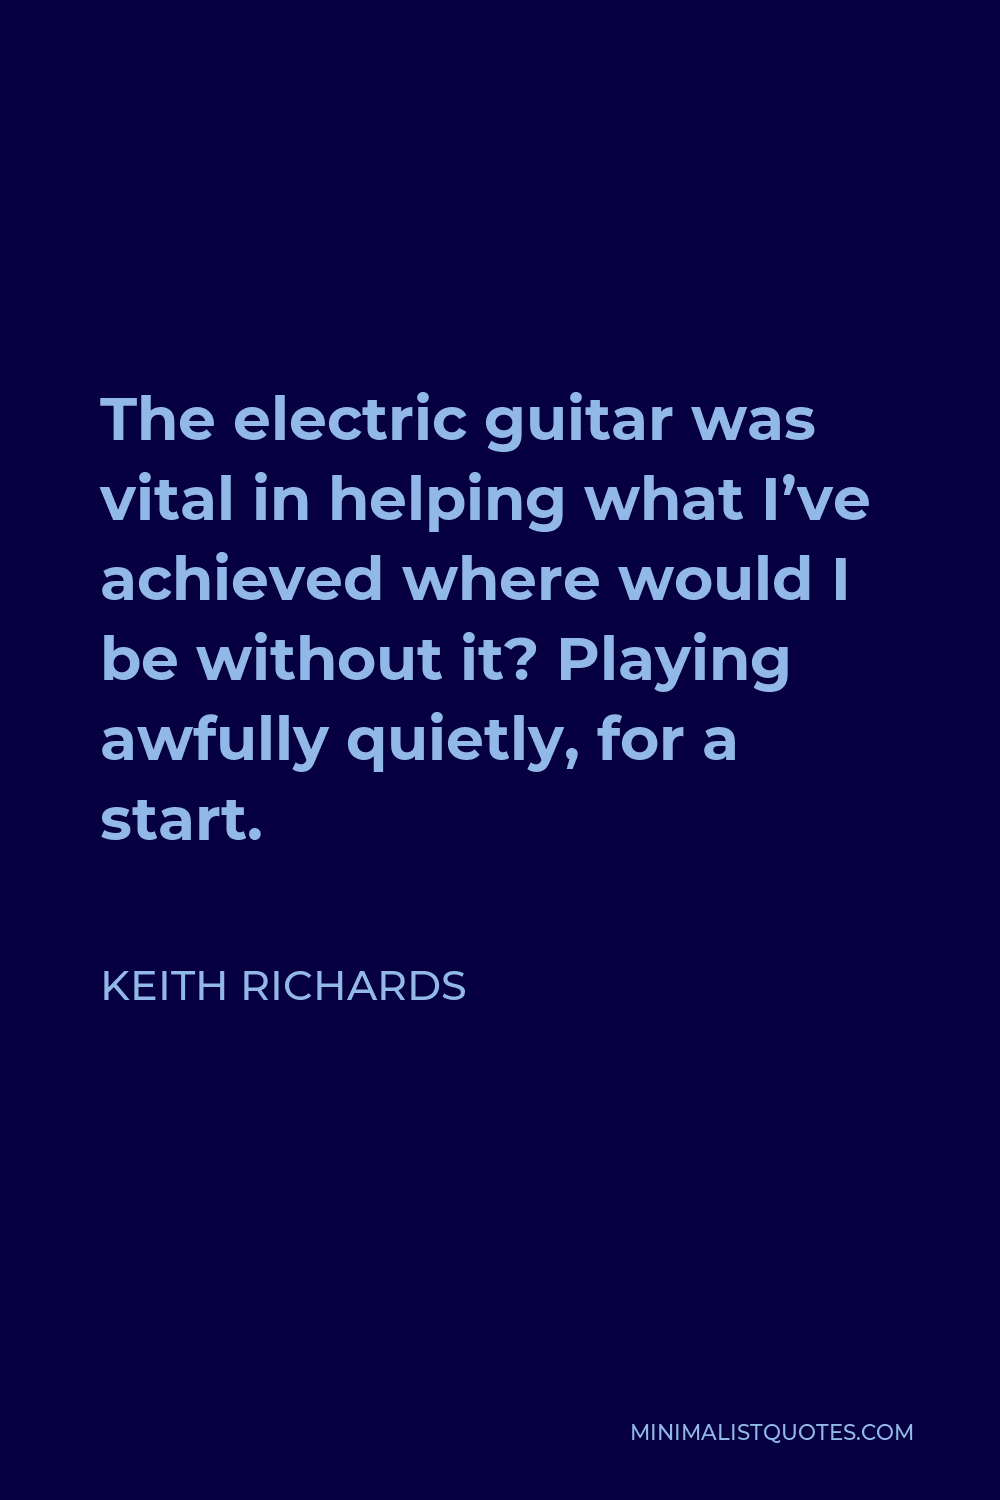 Keith Richards Quote - The electric guitar was vital in helping what I’ve achieved where would I be without it? Playing awfully quietly, for a start.